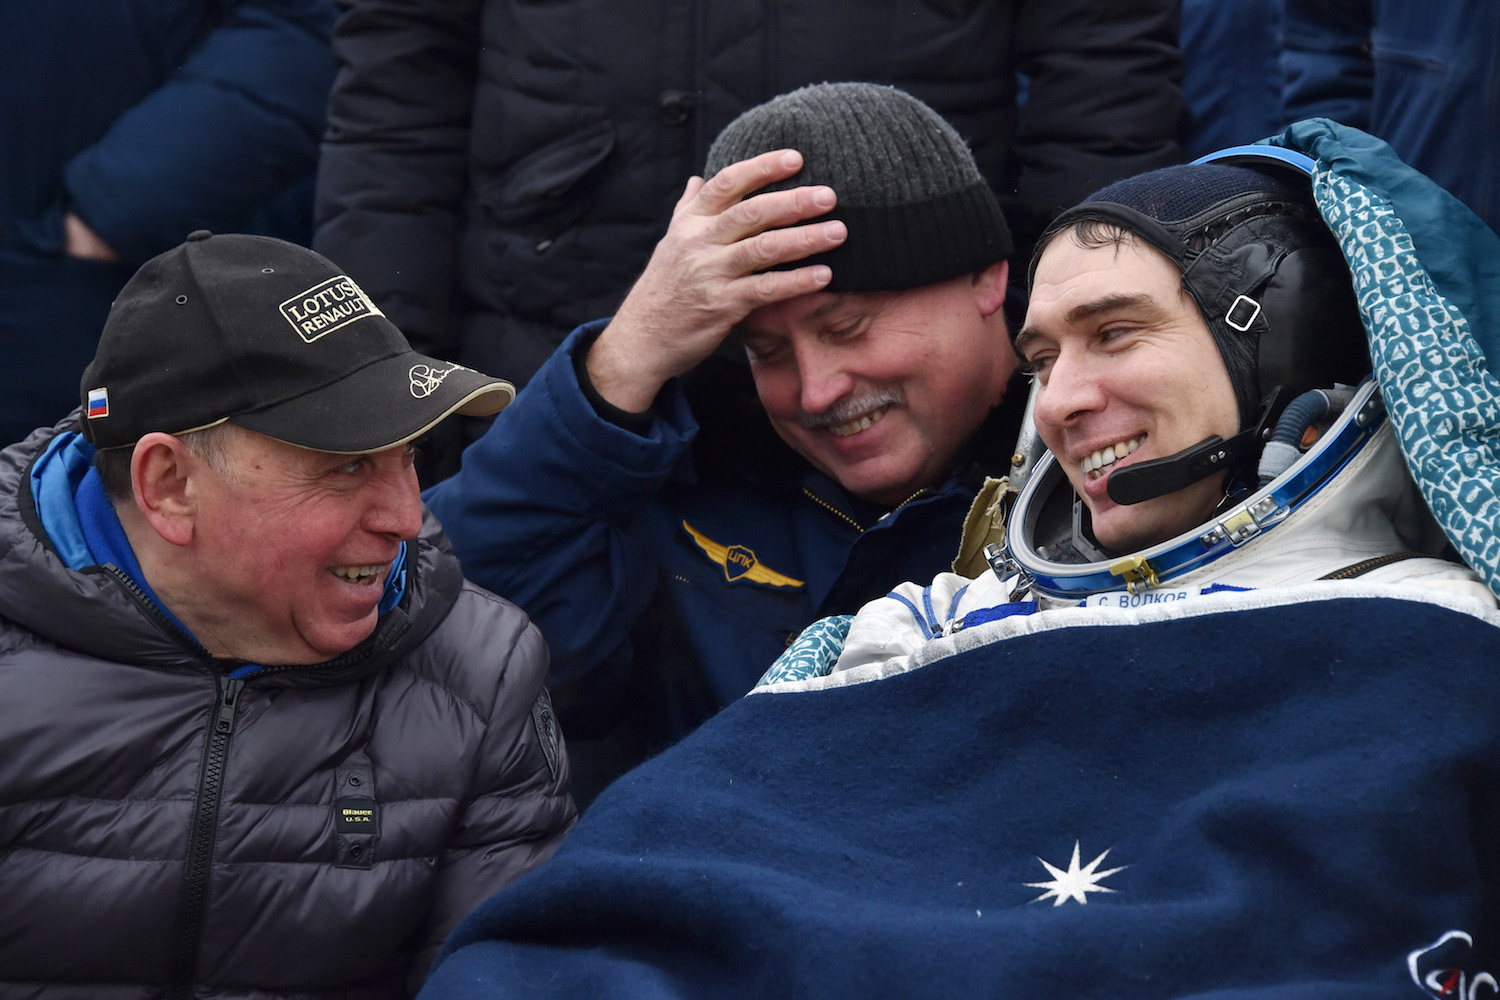 International Space Station (ISS) crew member Sergey Volkov of Russia looks at his father Soviet cosmonaut Alexander Volkov, left, after landing near the town of Dzhezkazgan, Kazakhstan, on Wednesday, March 2, 2016. US astronaut Scott Kelly and Russian cosmonaut Mikhail Kornienko returned to Earth on March 2 after spending almost a year in space in a ground-breaking experiment foreshadowing a potential manned mission to Mars. (Krill Kudryavtsev/Pool photo via AP)